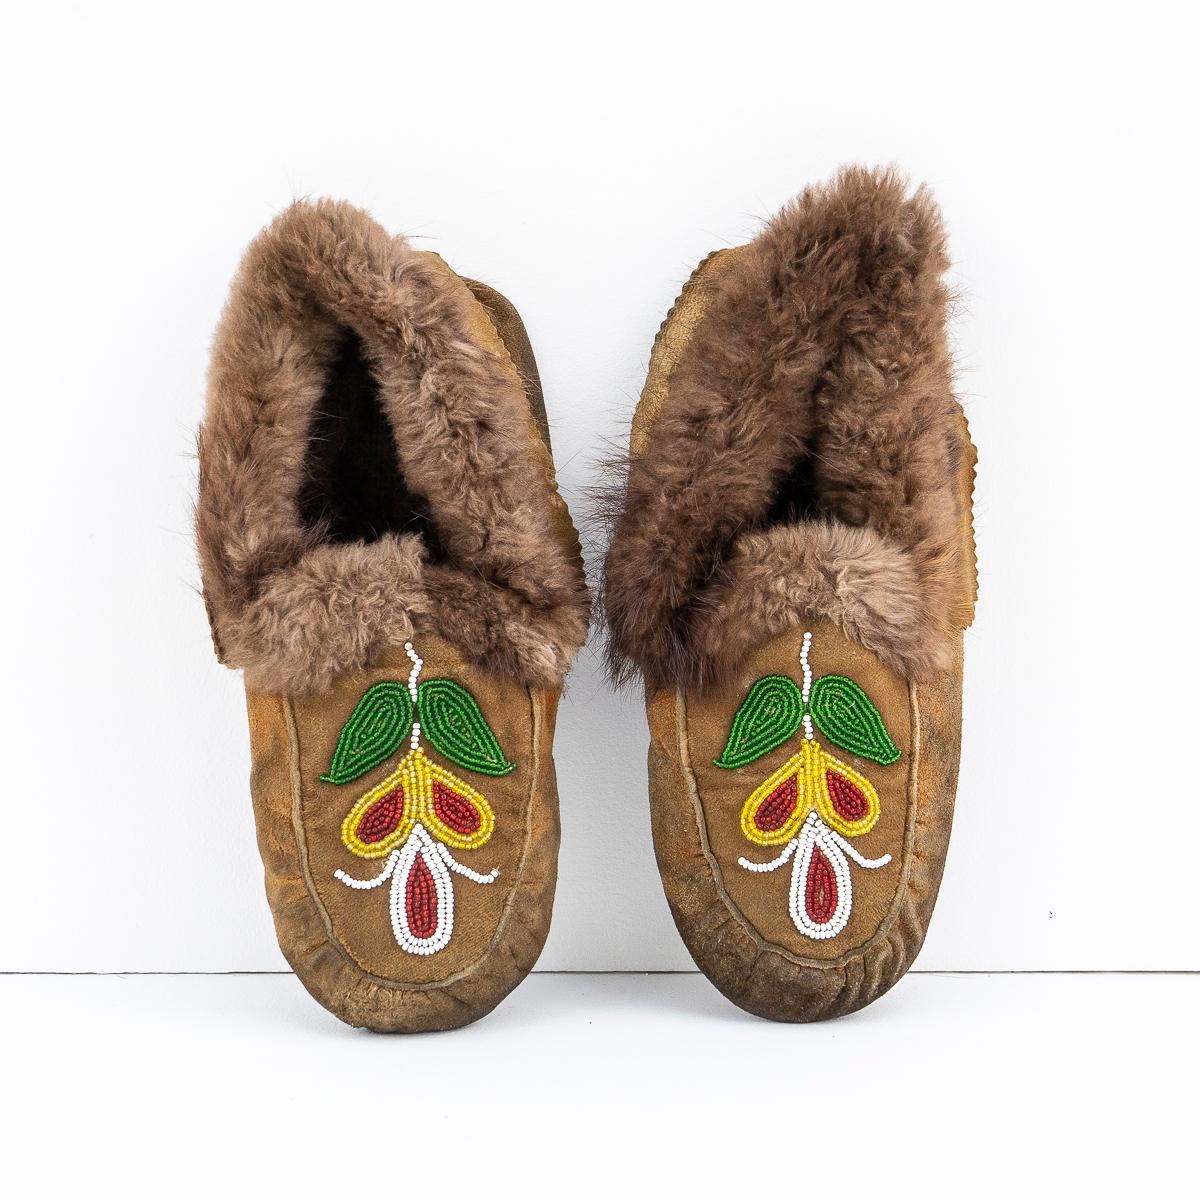 TRADITIONAL OJIBWAY TRIBAL SHOES WITH FLORAL BEAD DETAILING
Originating from the Ojibwe (Ojibwa) people from what is currently Southern Canada and the North Mid-Western United States.

Handmade from smoked moose leather with fur